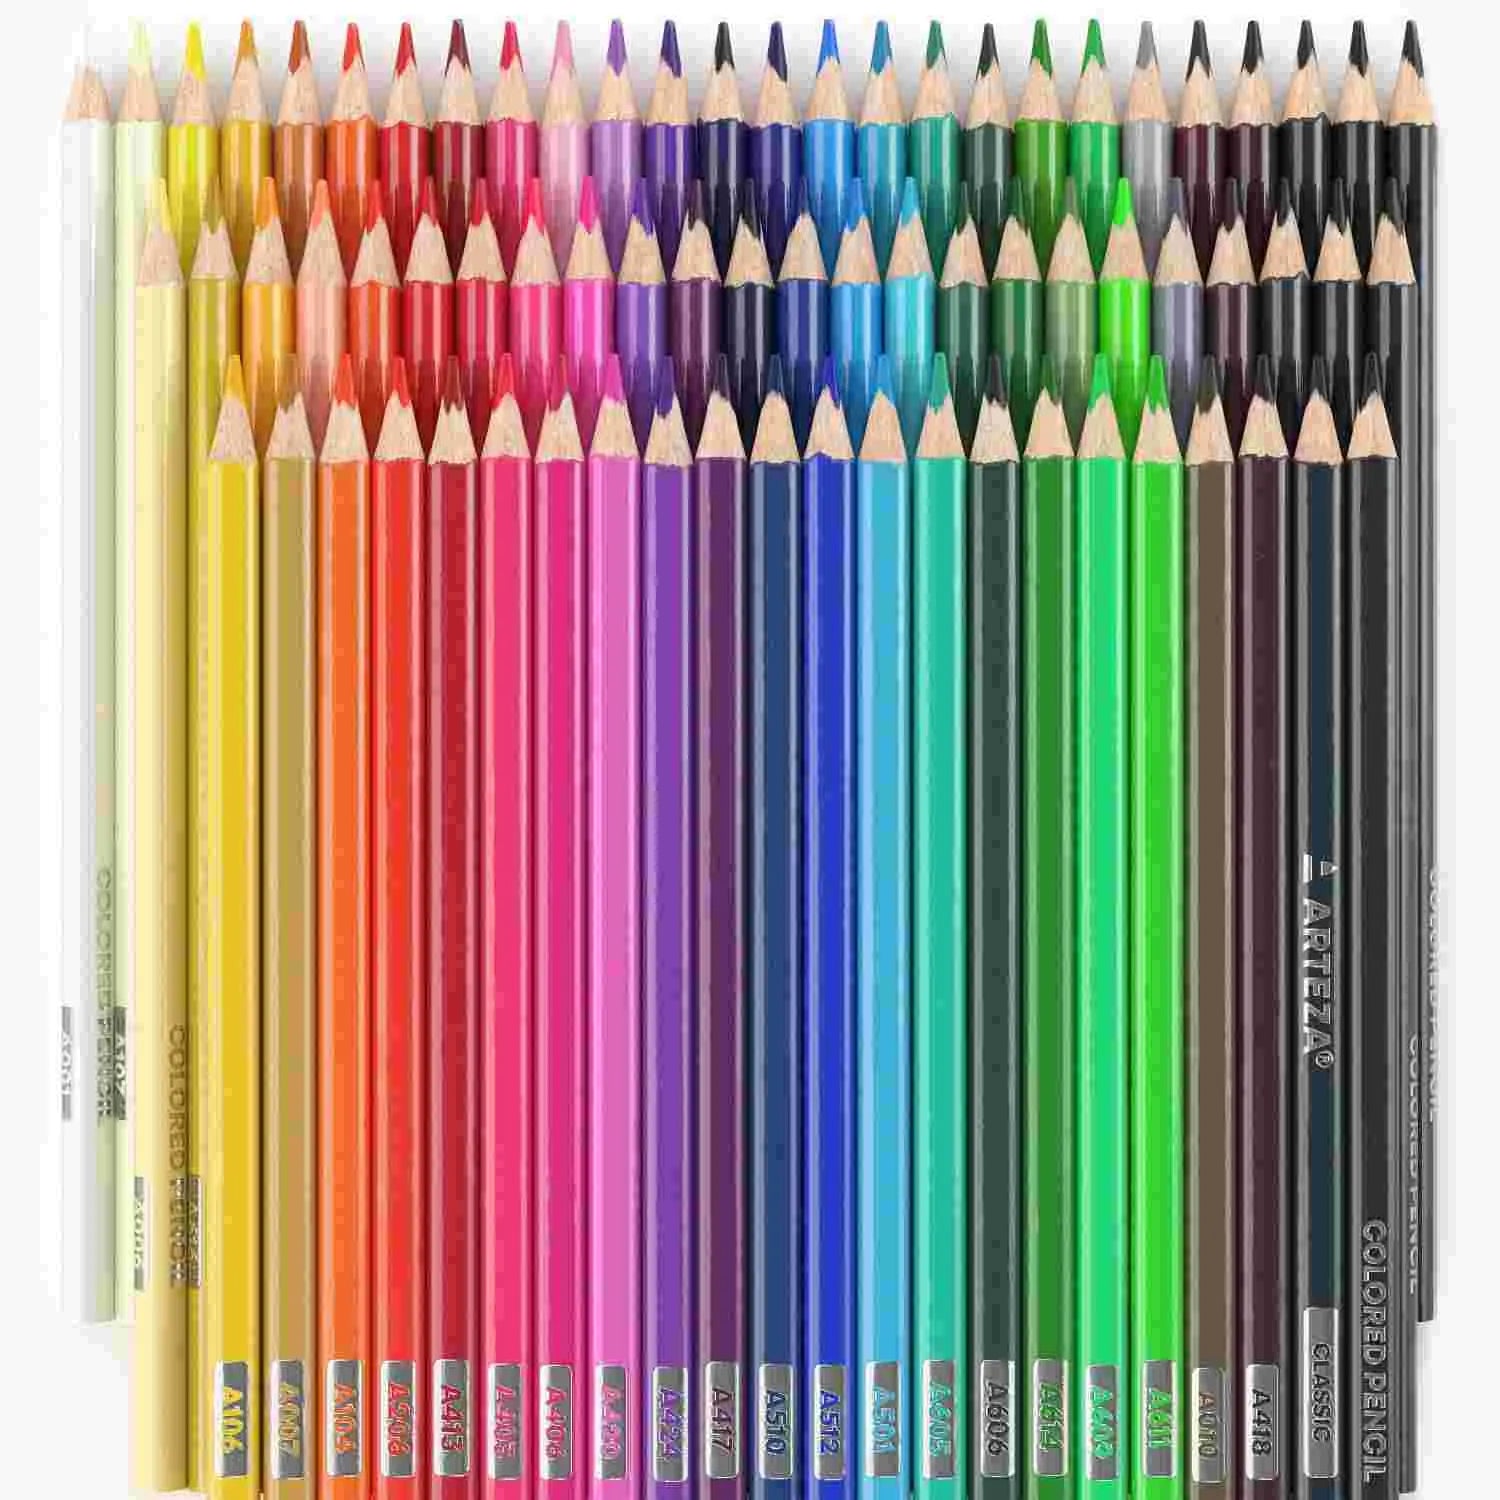 https://canvazo.com/cdn/shop/files/ARTEZA-Colored-Pencils-for-Adult-Coloring-with-Case_-72-Assorted-Drawing-Pencils-in-Vibrant-Colors_-Pencil-Set-for-Coloring-Books-and-Journals_-Triangular-Shape_-Professional-Art-Supp_1909cc4a-fd5b-4696-b4b3-54df82d9373d.jpg?v=1695380865